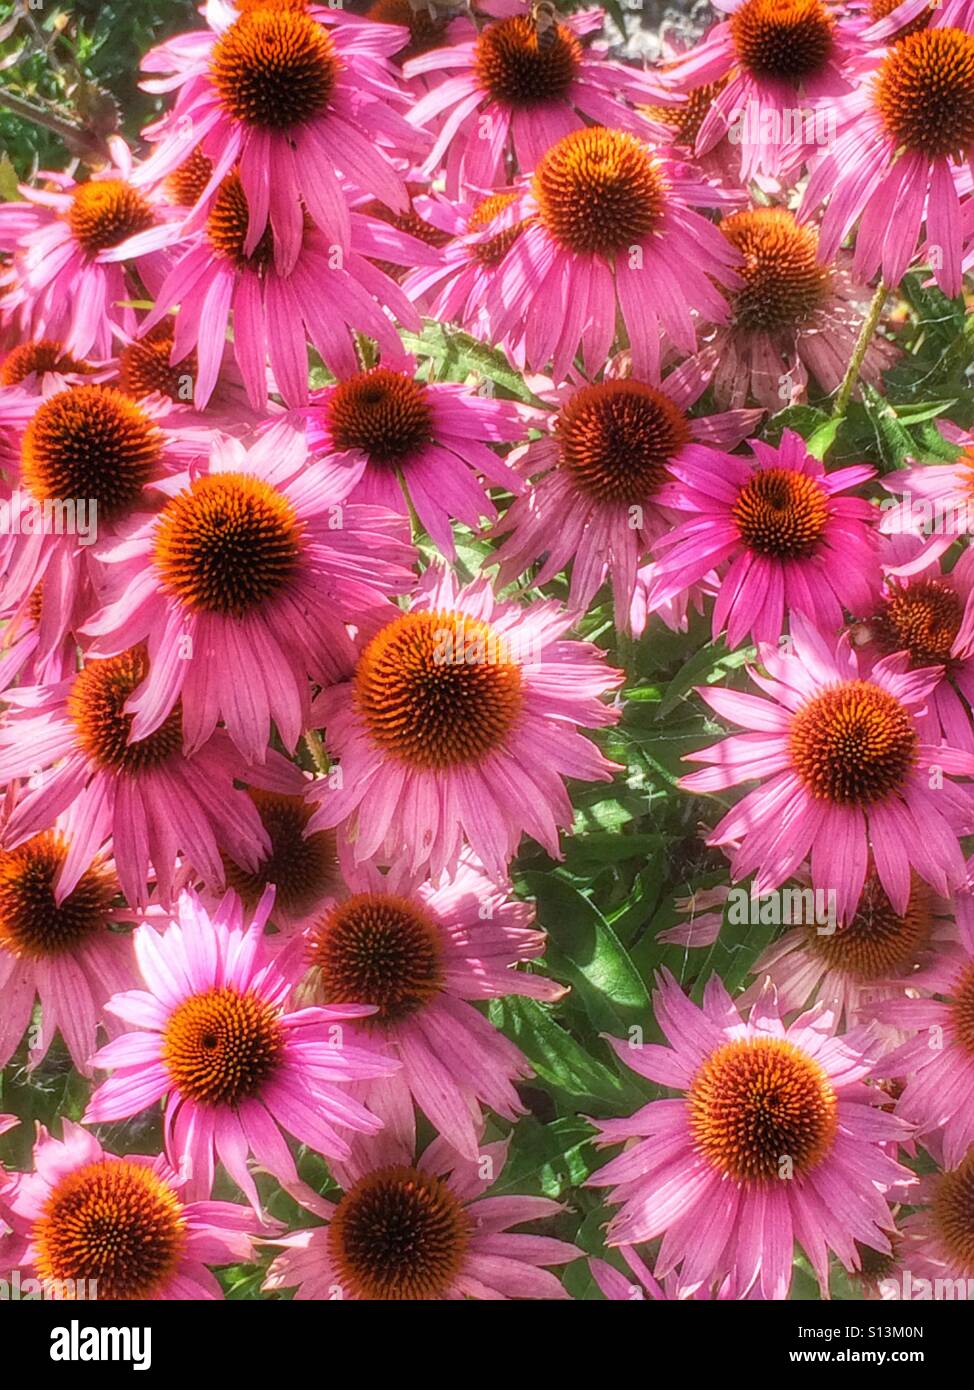 Cone flower, medicinal herb Stock Photo